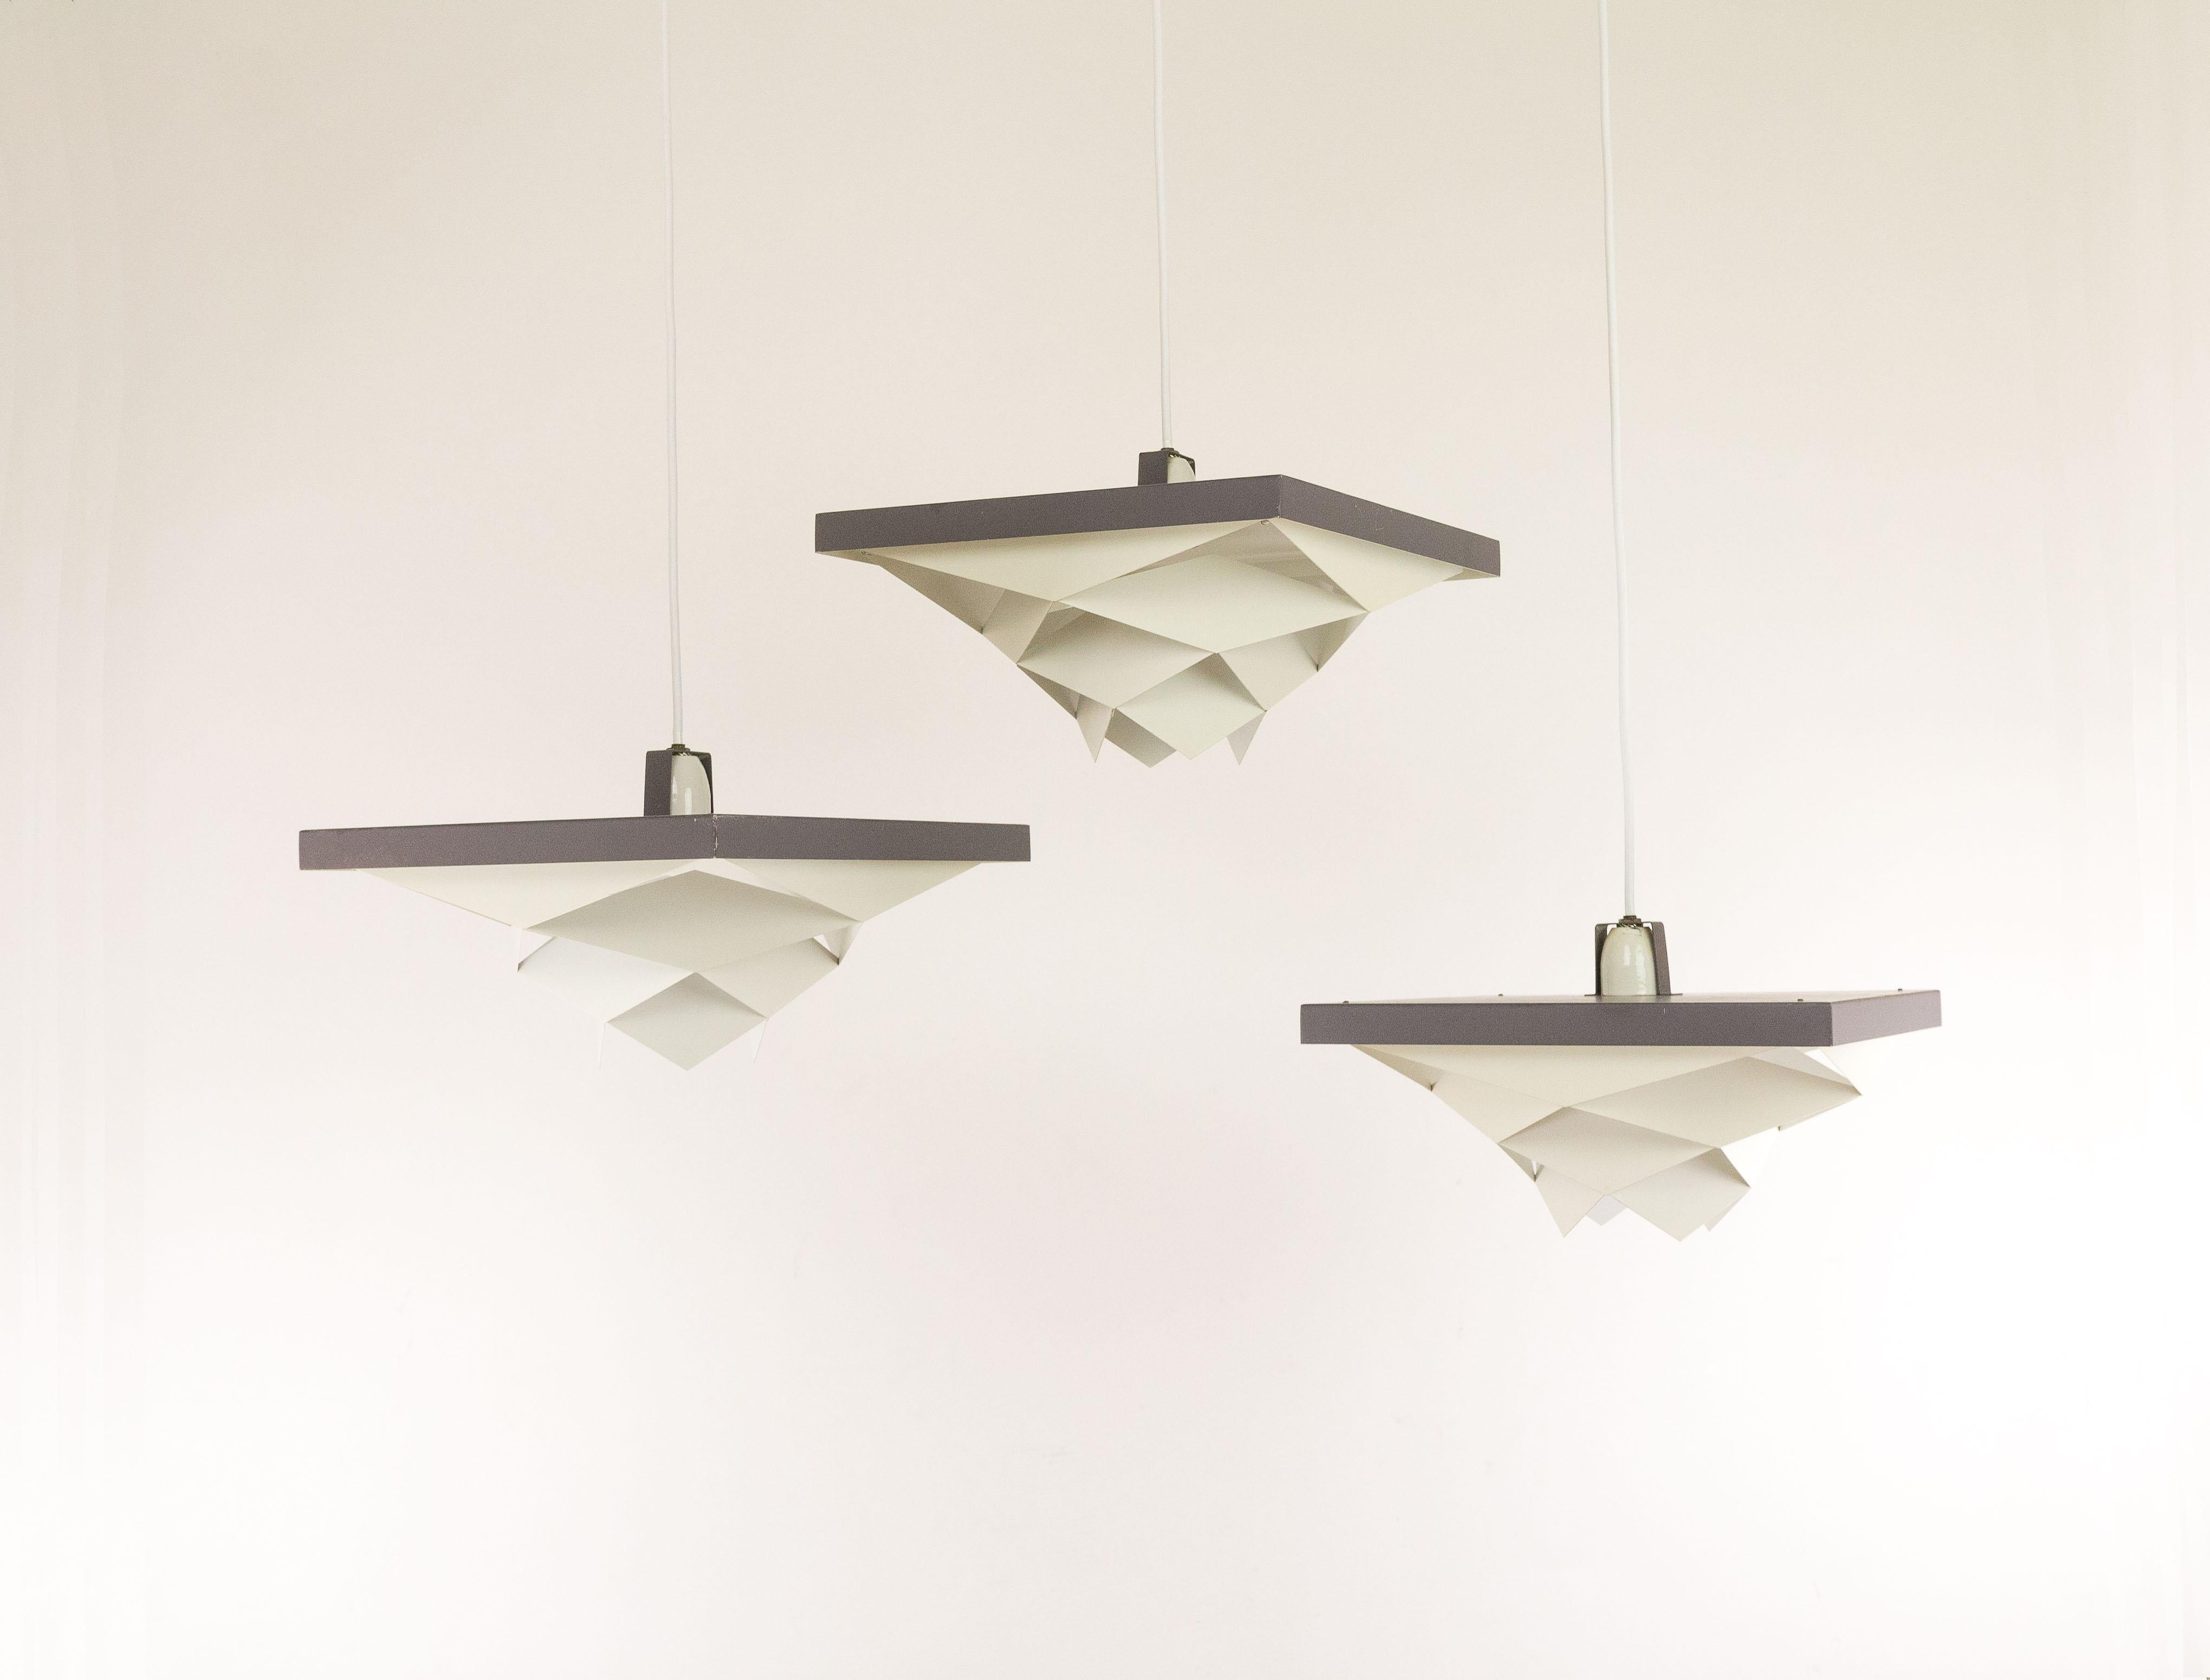 Set of seven Danish midcentury Symfoni pendants, designed by Preben Dahl in the early 1960s and produced by Hans Følsgaard Belysning.

Originally the lamps were part of a series of similar ceiling lights and pendants that were made of white and